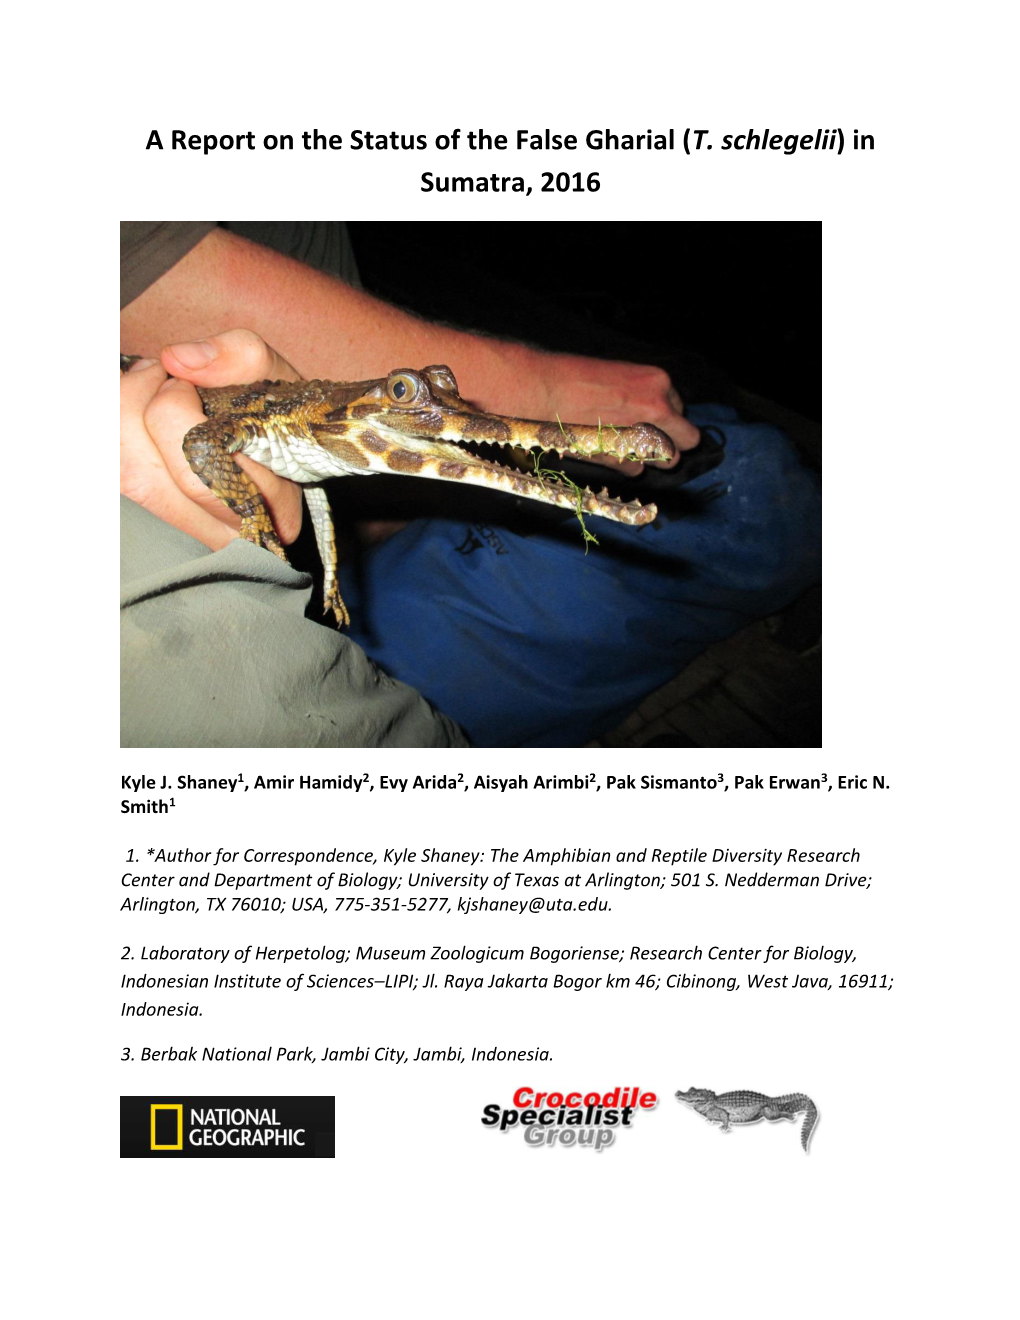 A Report on the Status of the False Gharial (T. Schlegelii) in Sumatra, 2016